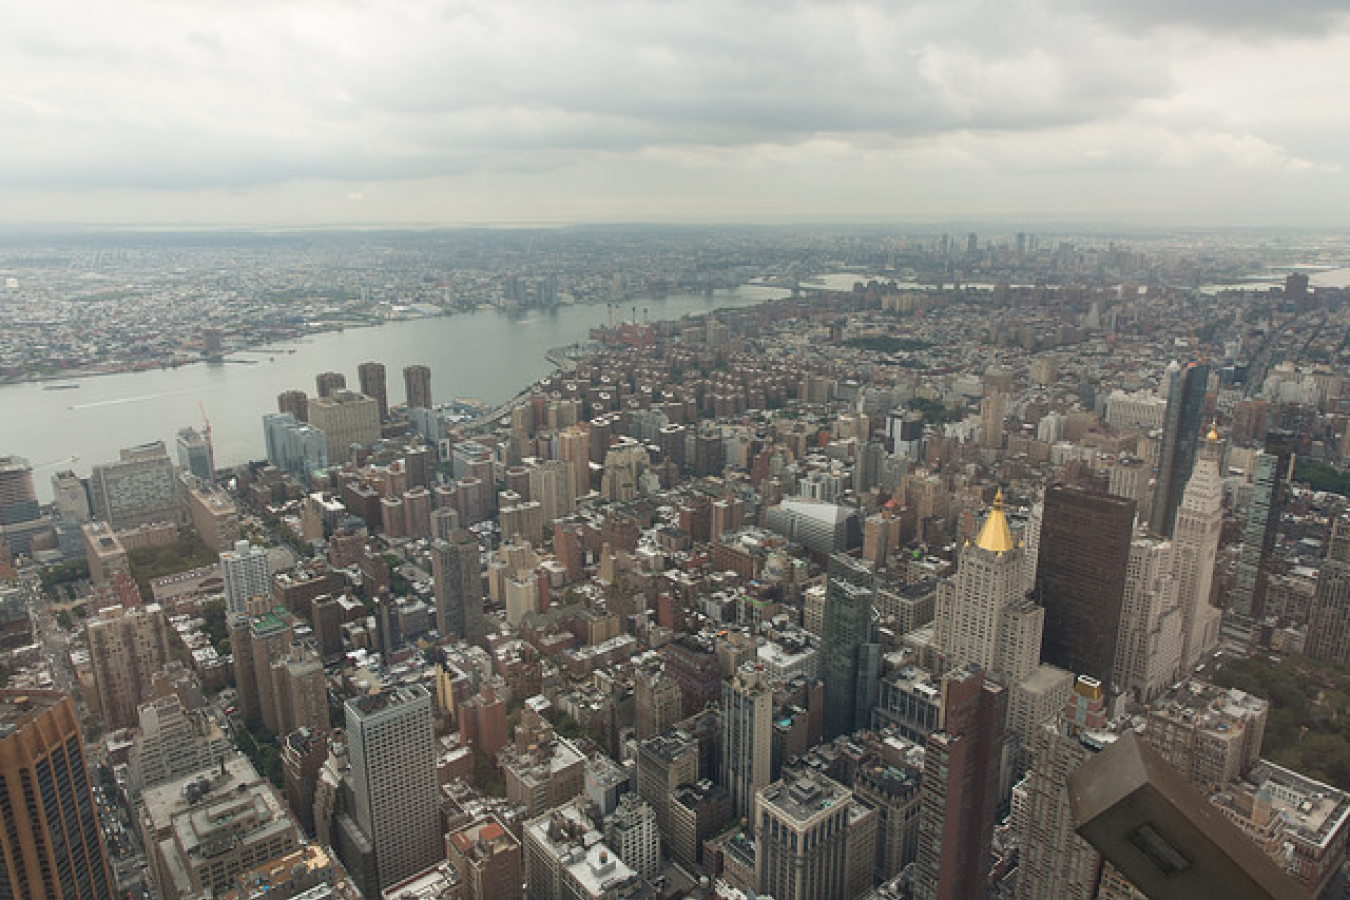 Empire State Building - 102nd Floor